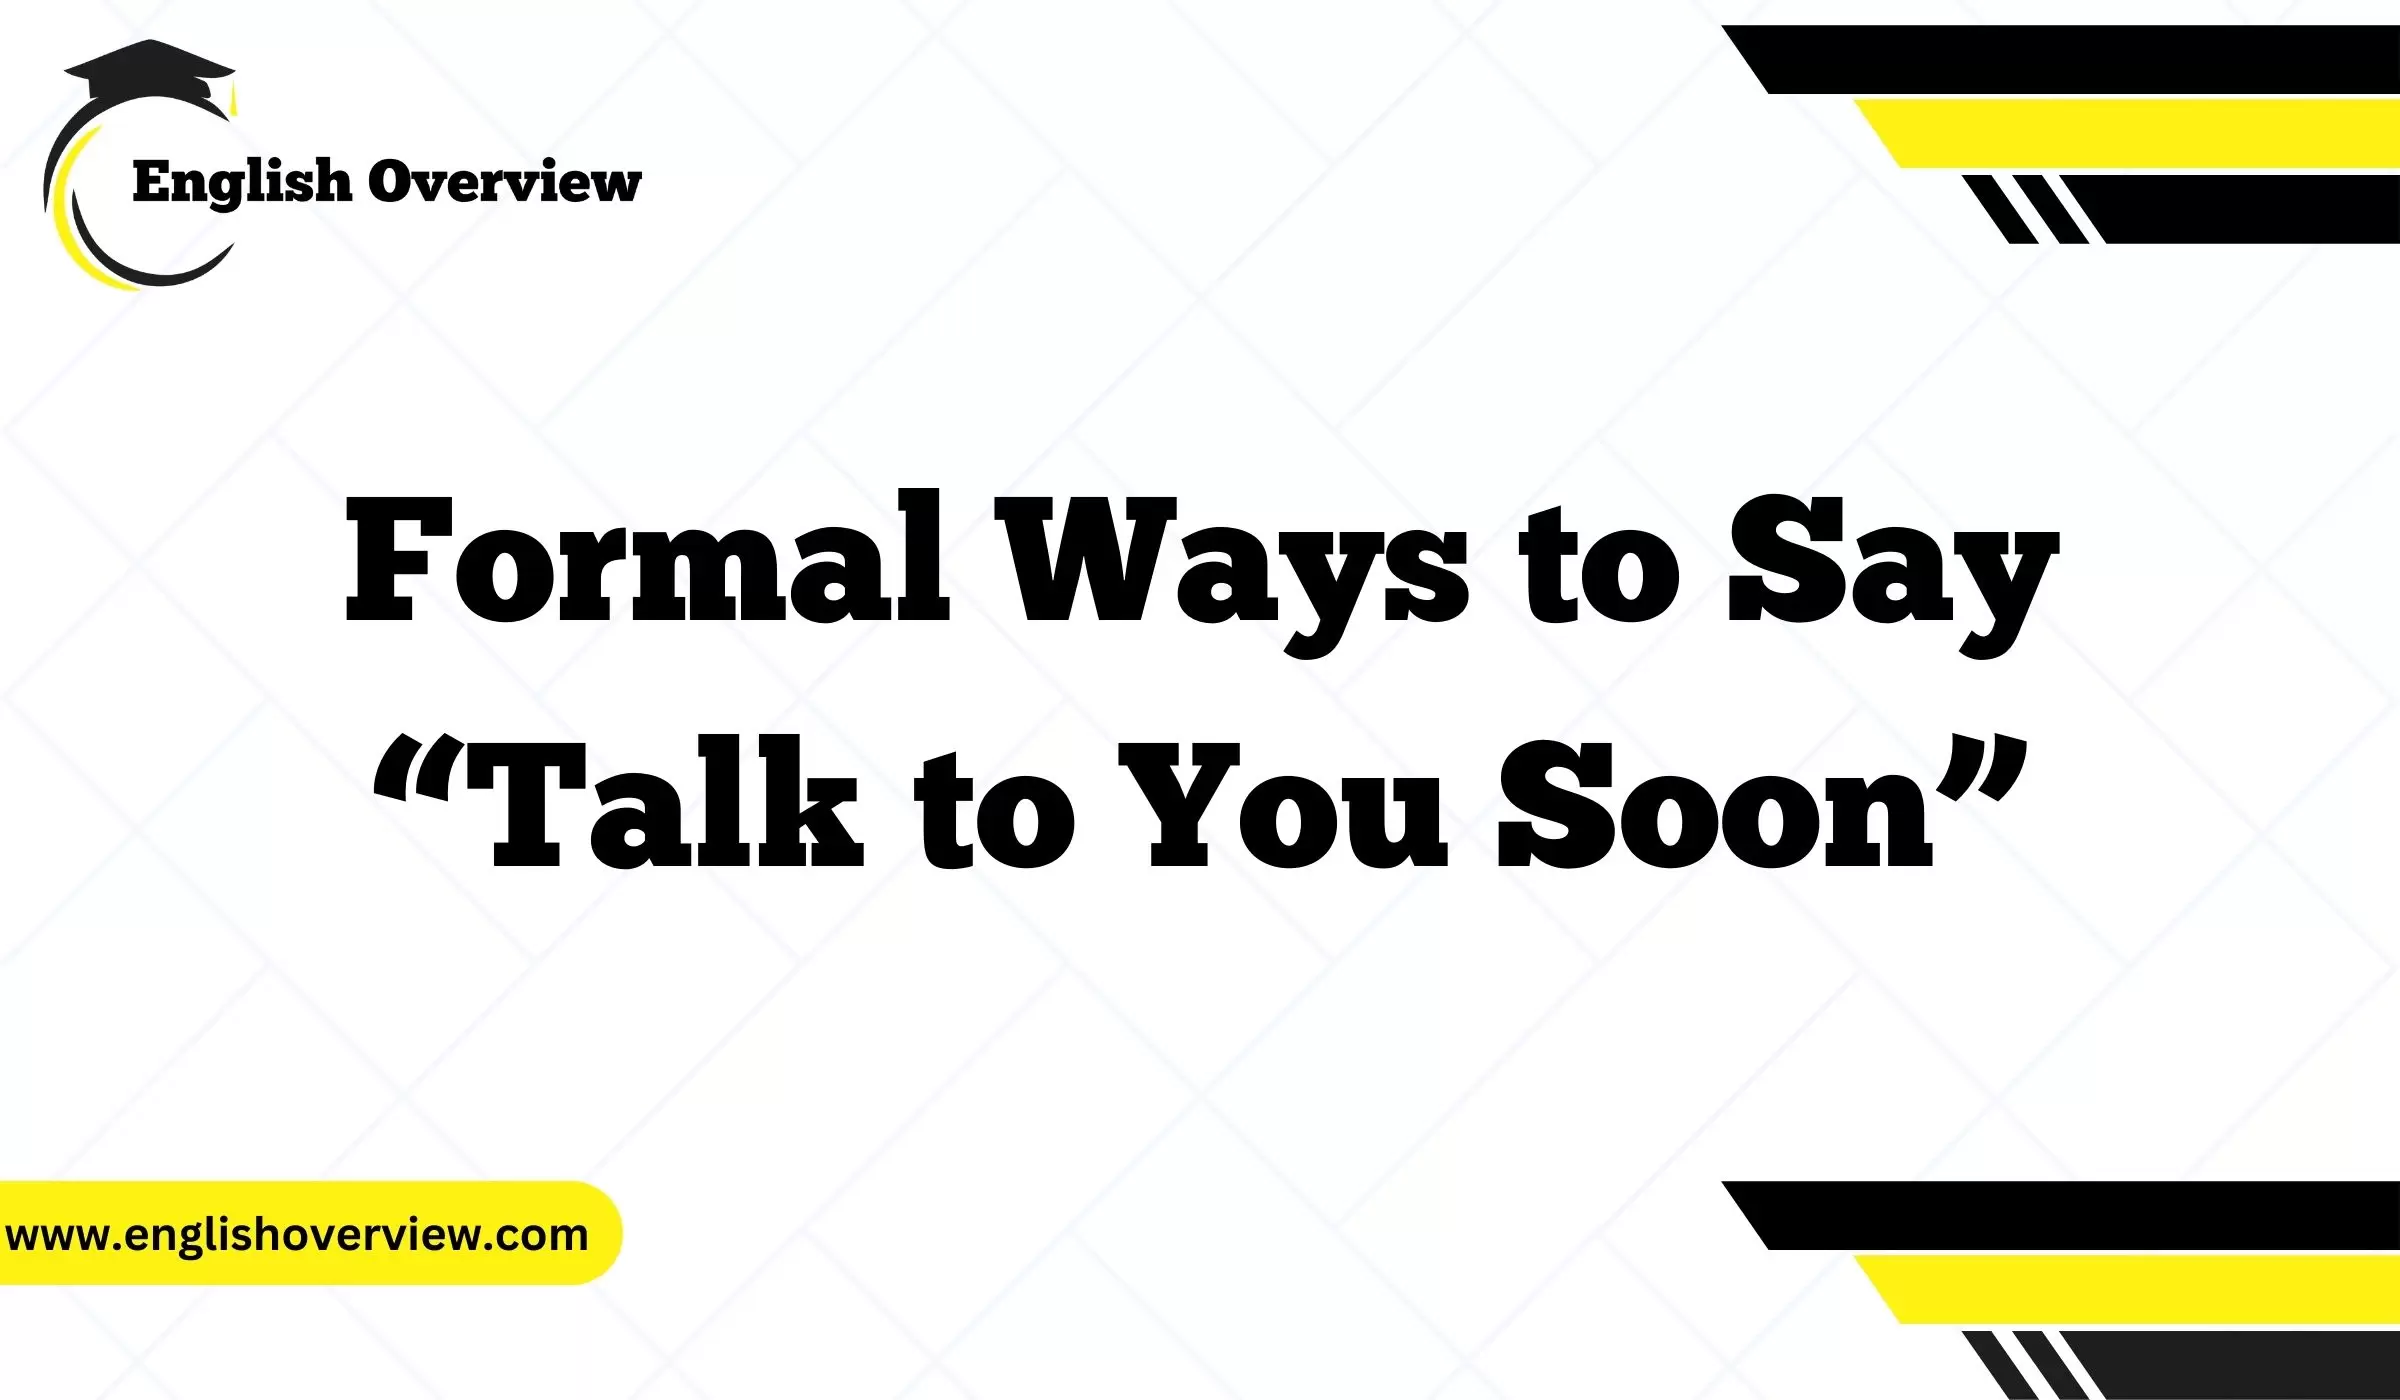 Formal Ways to Say “Talk to You Soon”